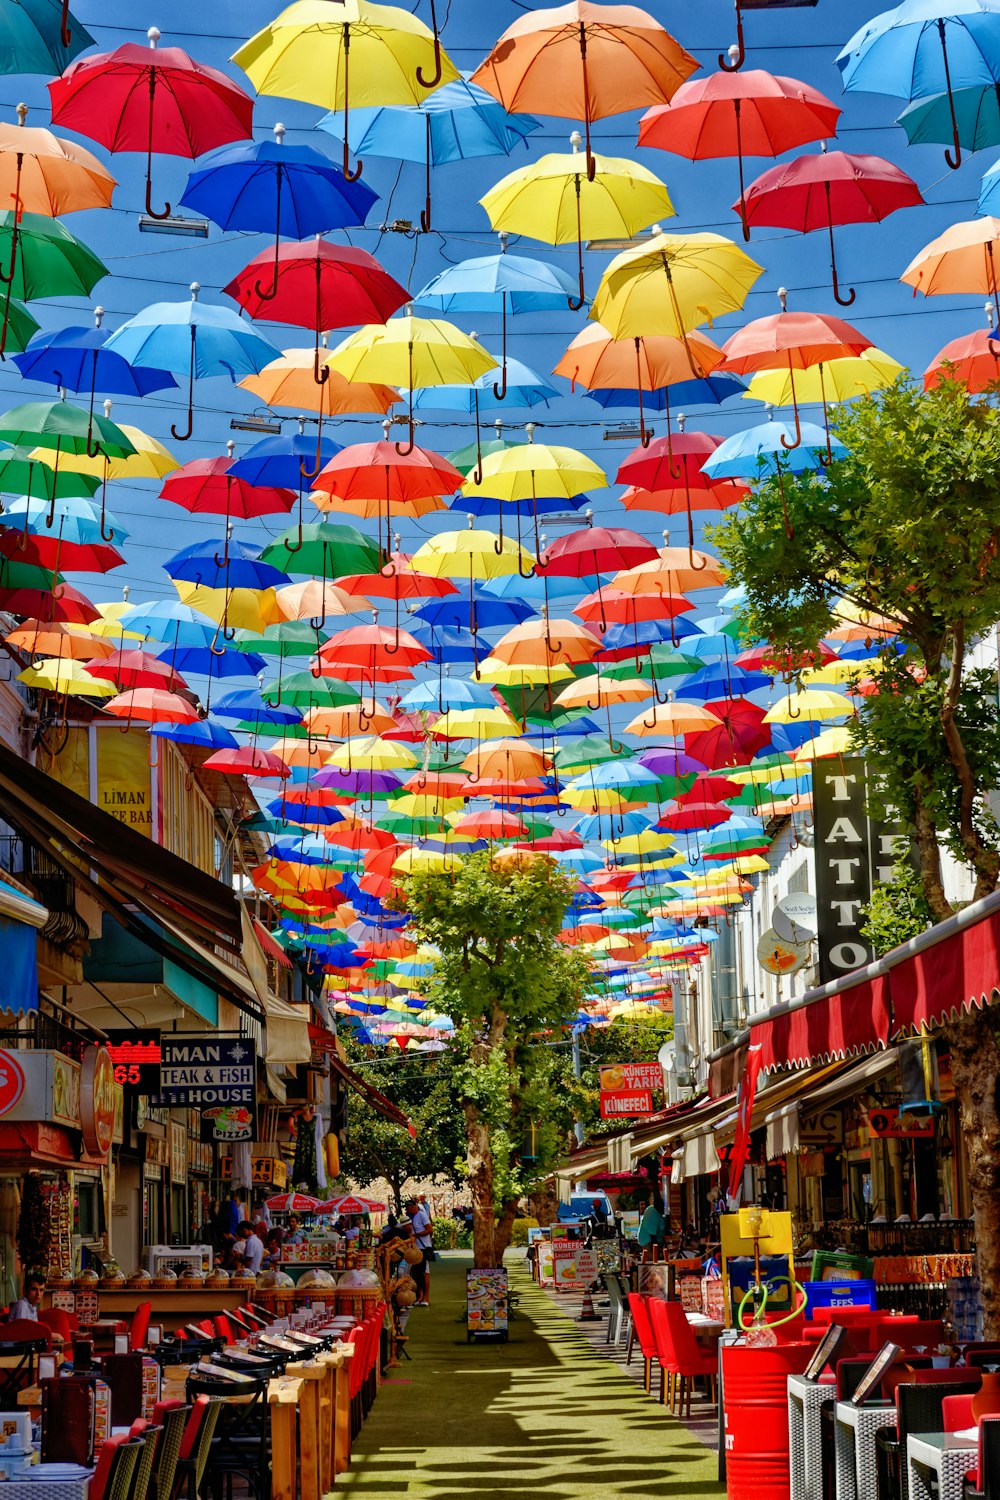 assorted umbrellas on the street during daytime